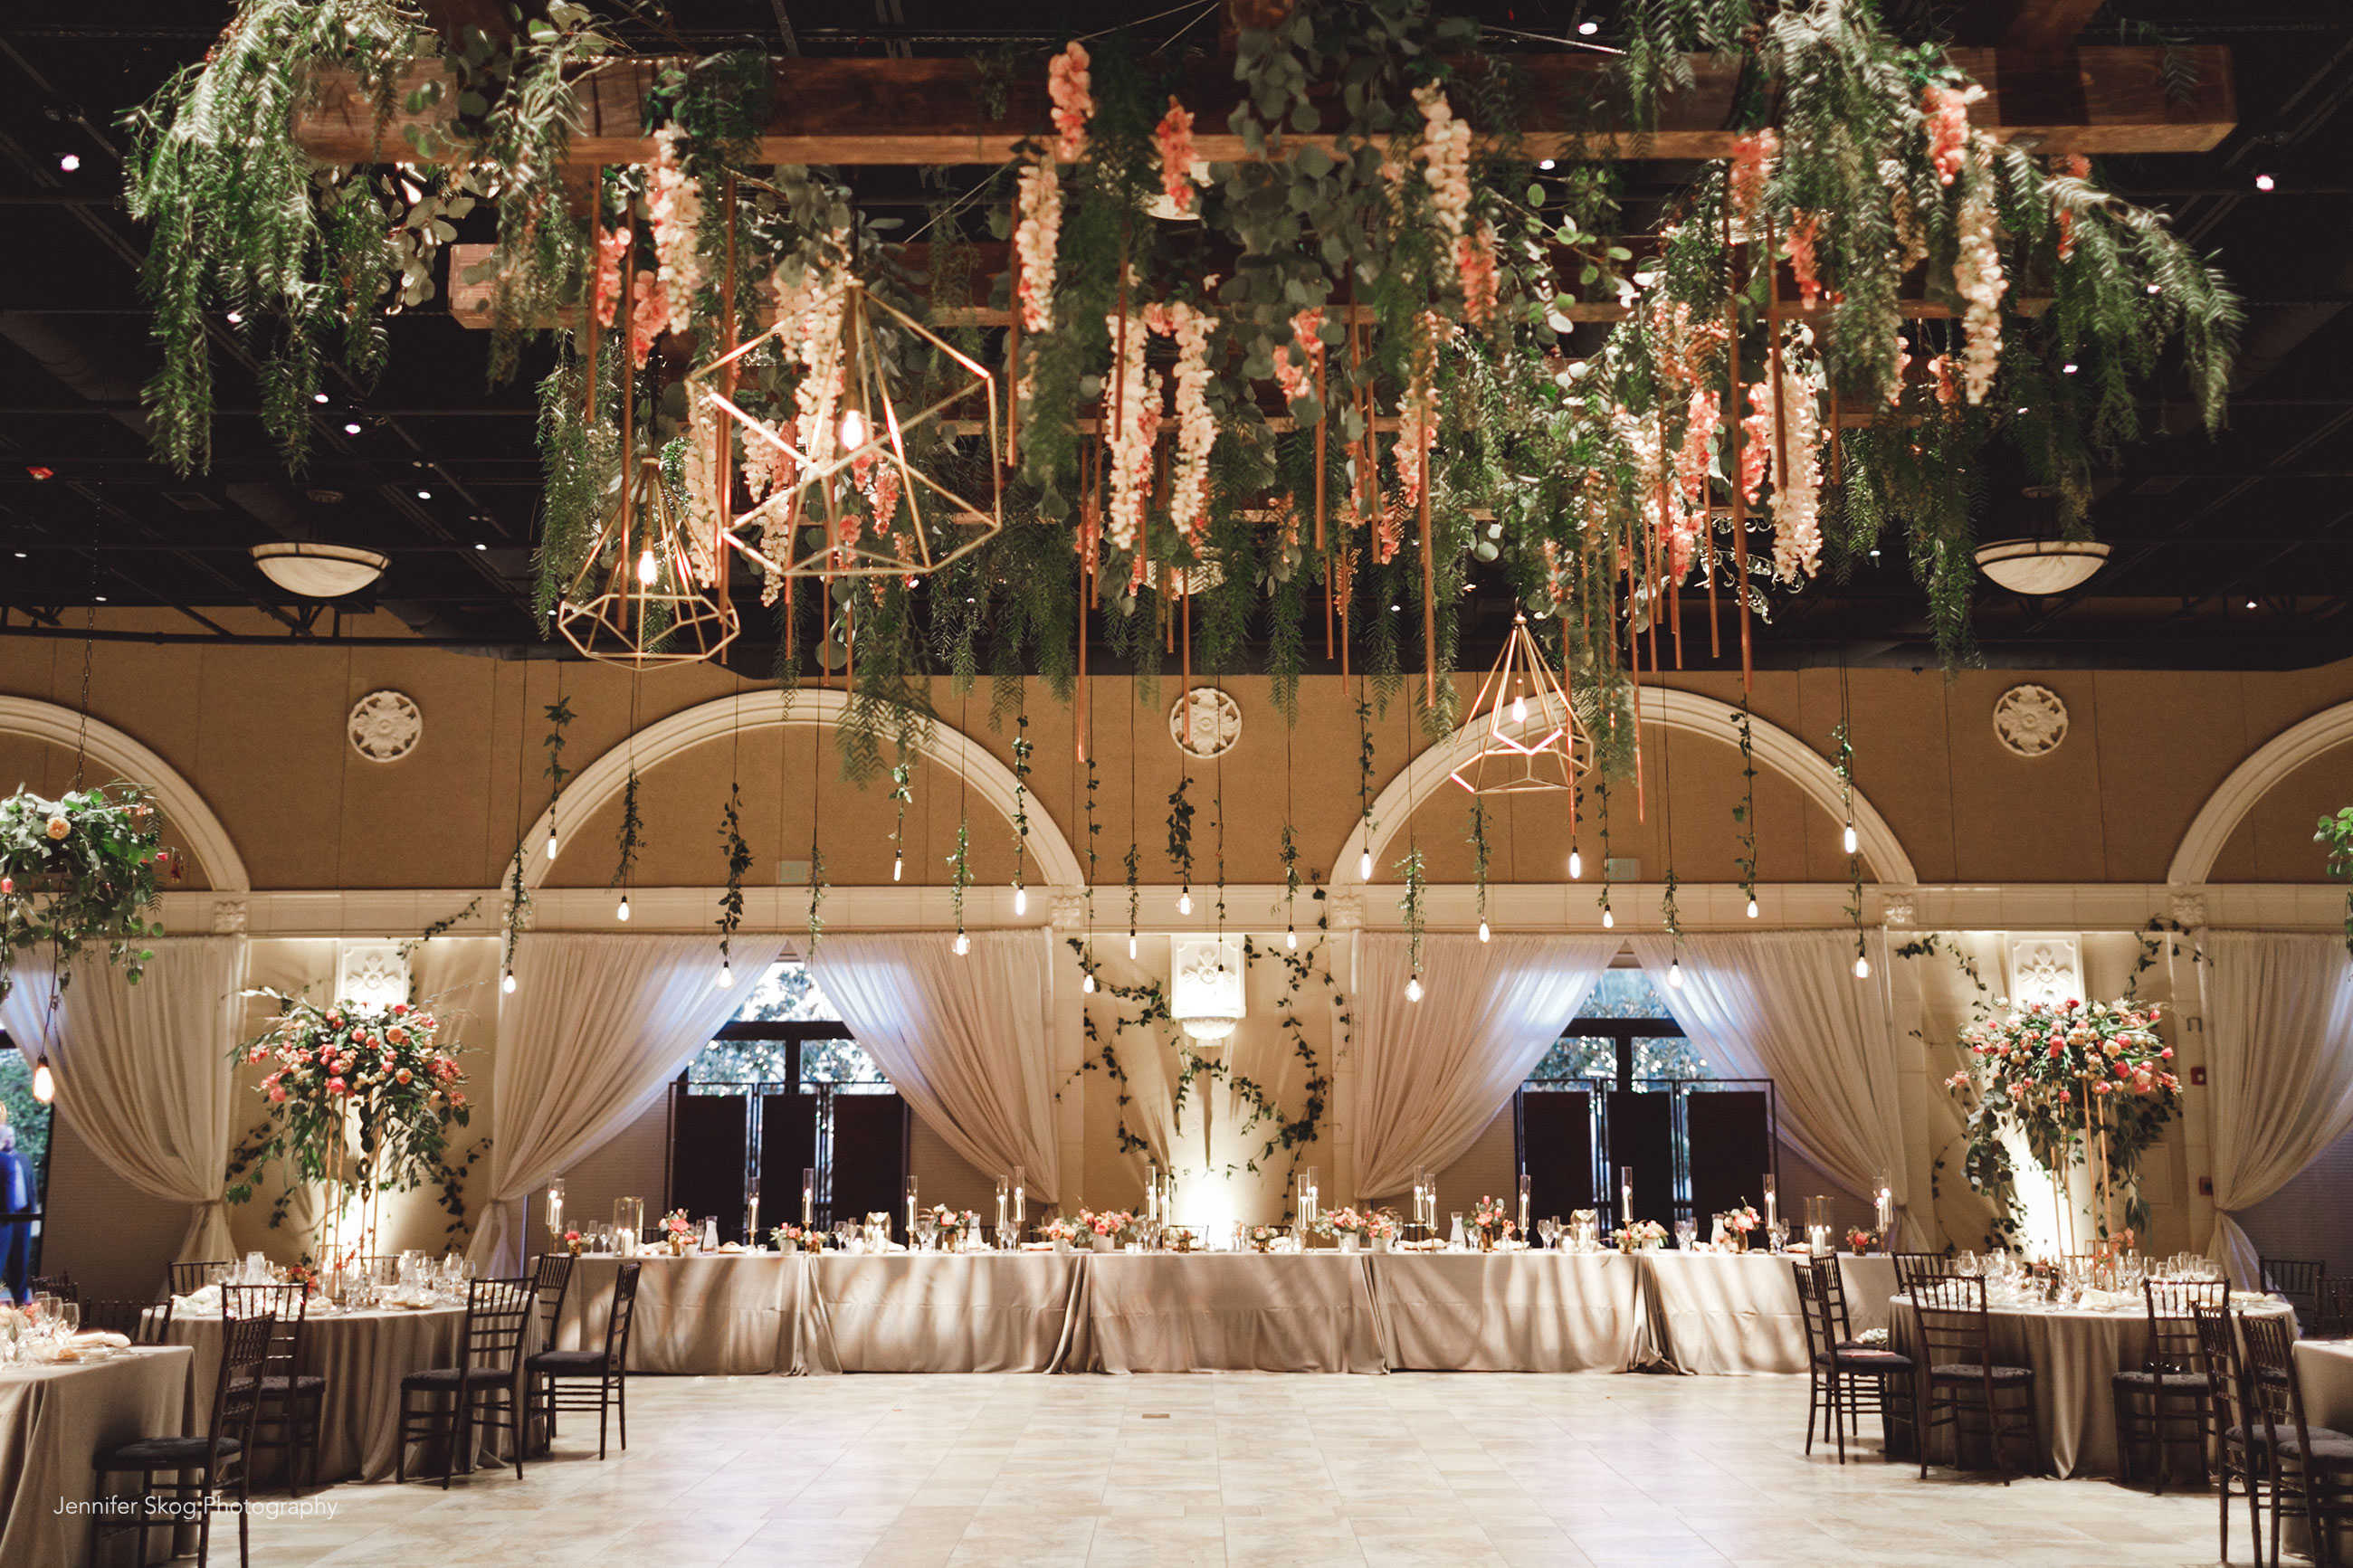 Gorgeous wedding reception at Casa Real at Ruby Hill Winery (www.casarealevents.com). Photo by: Jennifer Skog Photography; Florals: Nicole Ha Design;  Lighting: Fantasy Sound Events  Rentals: Pleasanton Rentals